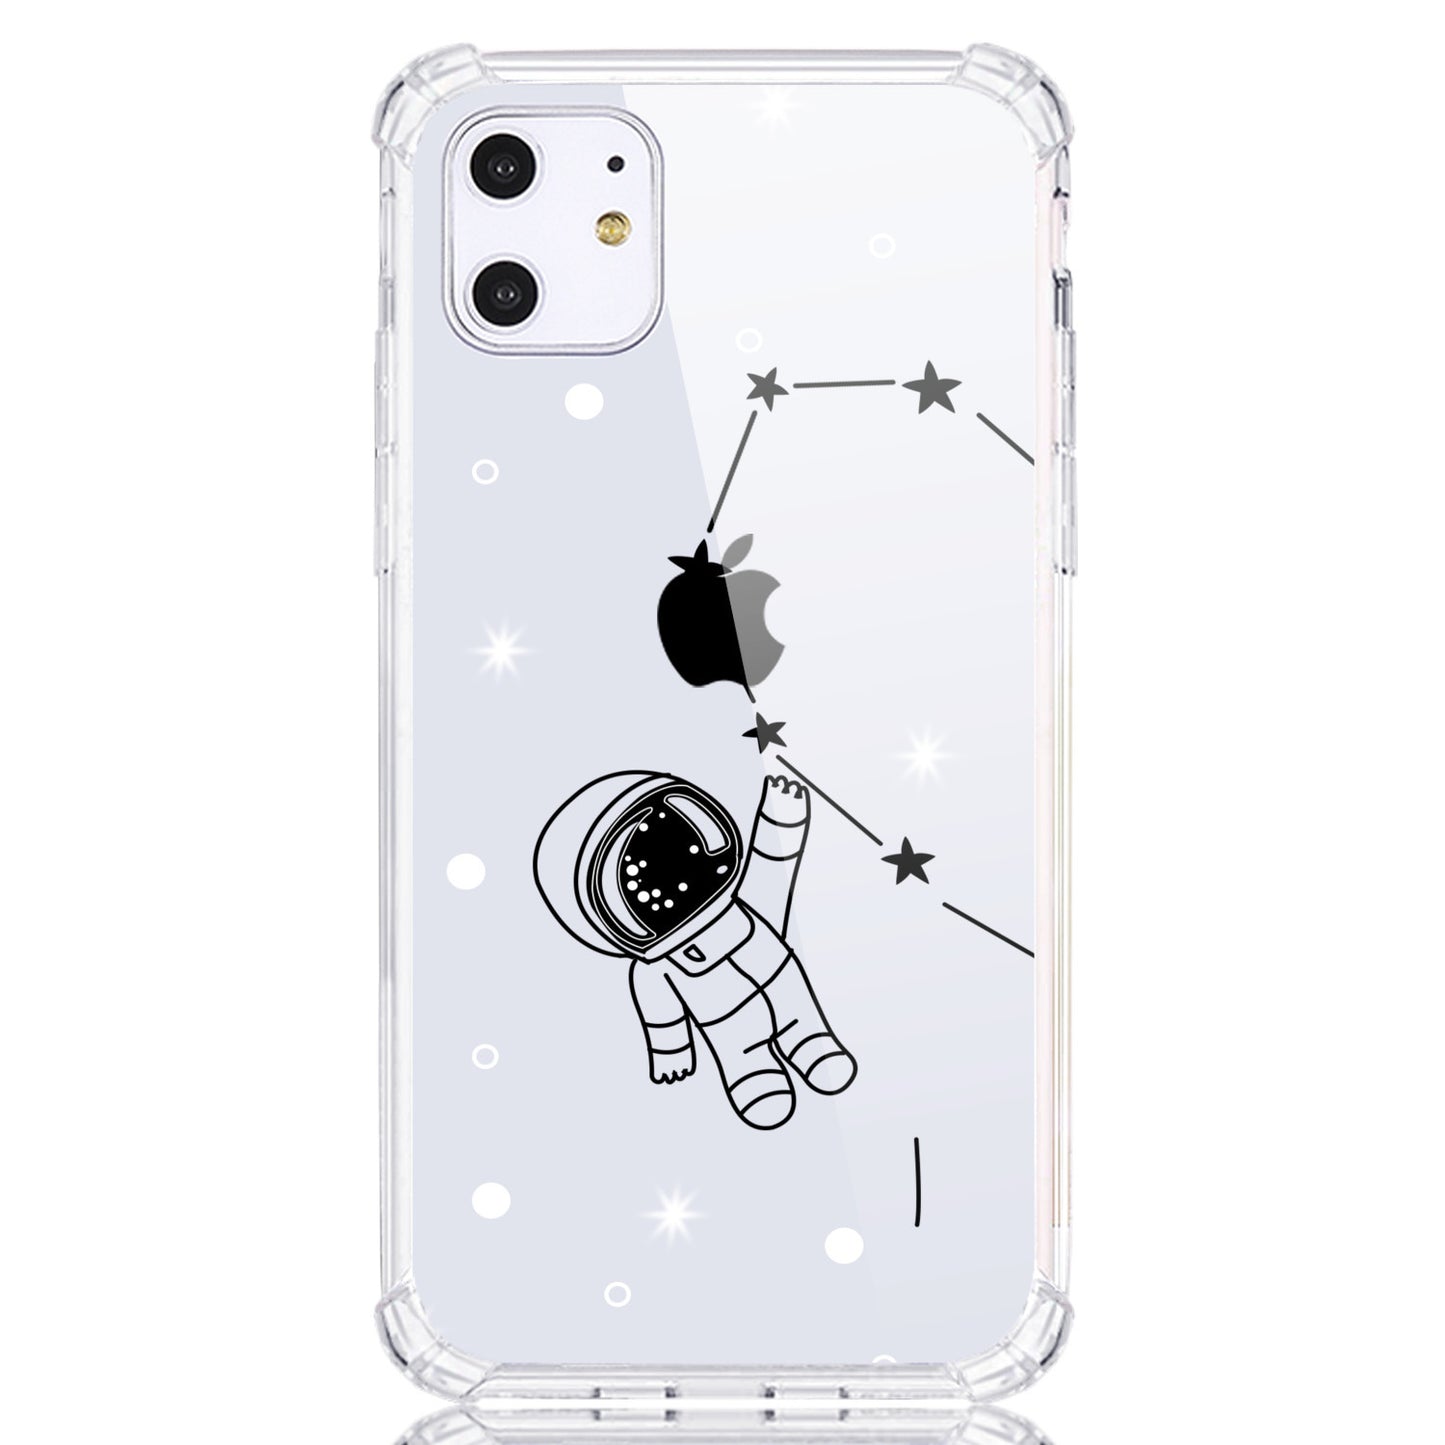 Cartoon Astronaut Connect With Heart Illustration Couple iPhone Case